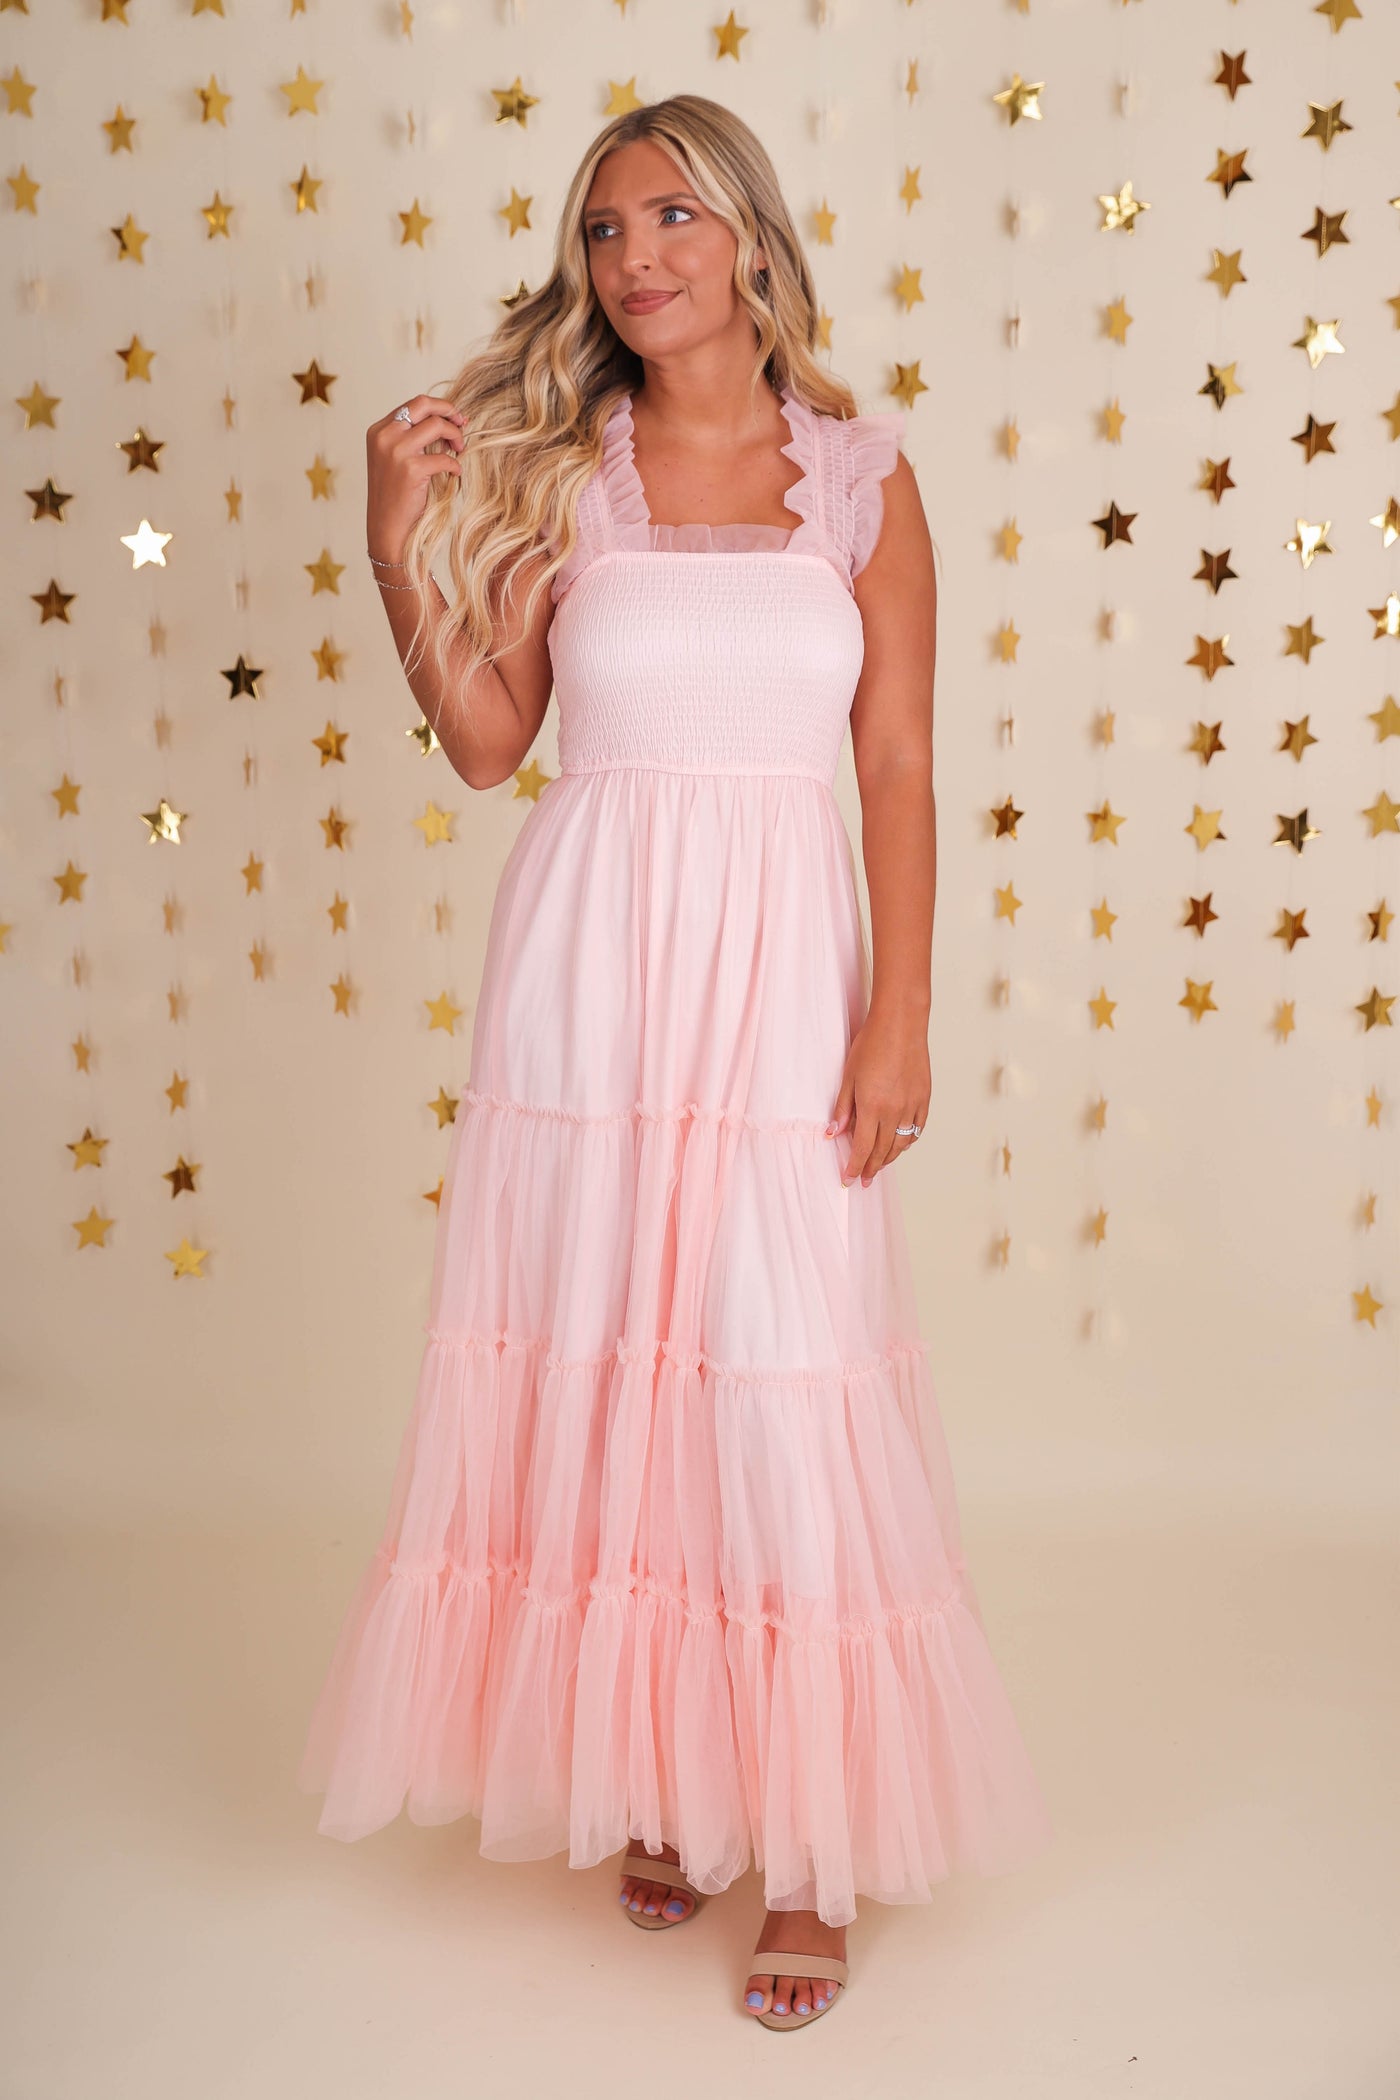 Blush Pink Tulle Maxi Dress- Women's Cocktail Dresses- Mable Pink Tulle Dress